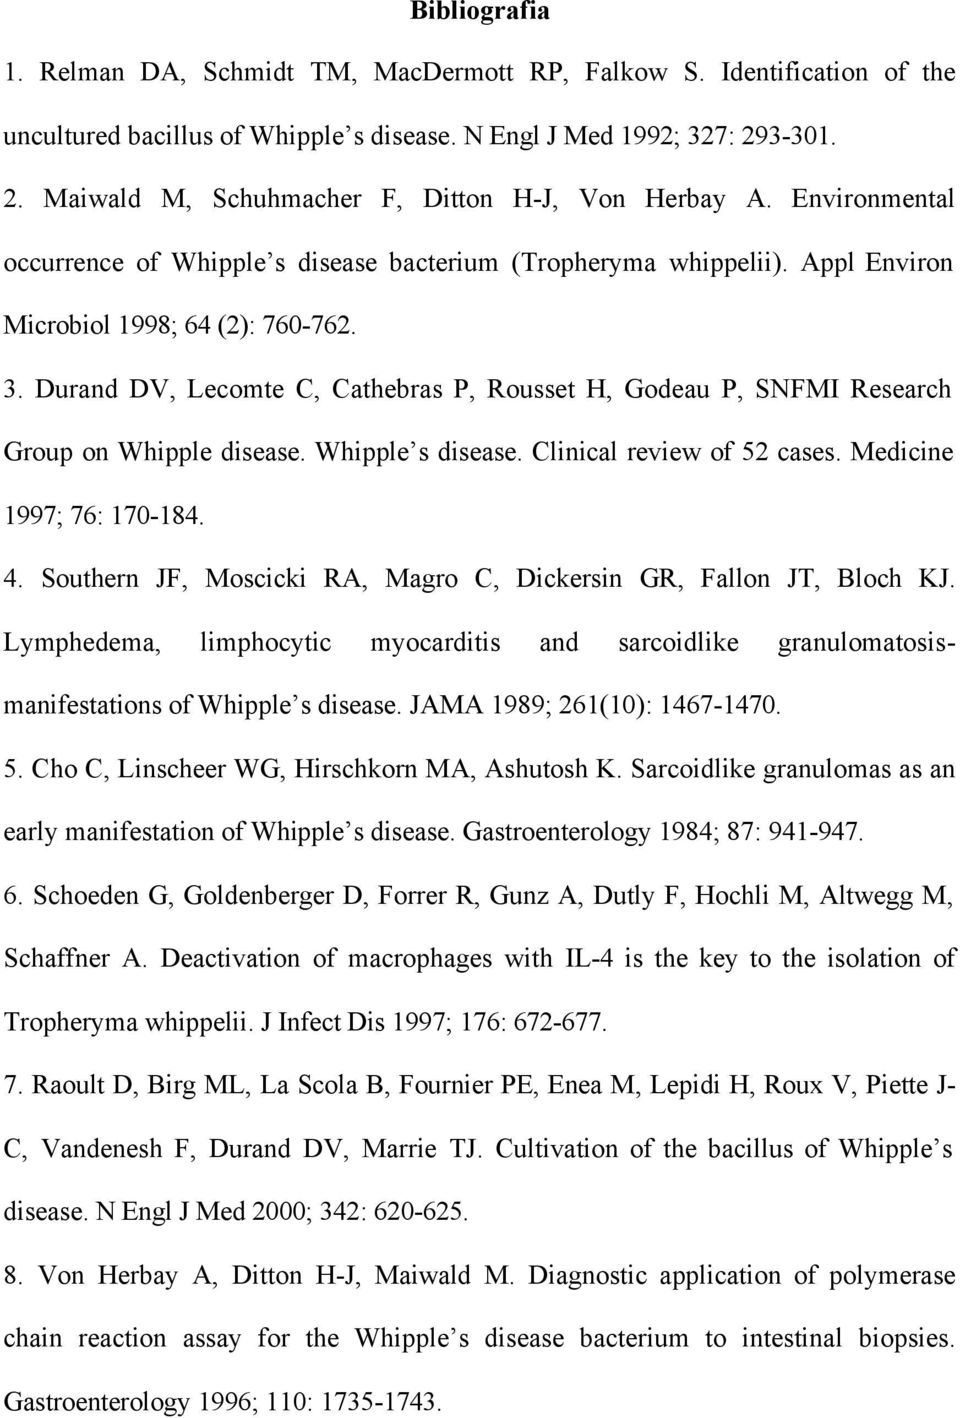 Durand DV, Lecomte C, Cathebras P, Rousset H, Godeau P, SNFMI Research Group on Whipple disease. Whipple s disease. Clinical review of 52 cases. Medicine 1997; 76: 170-184. 4.